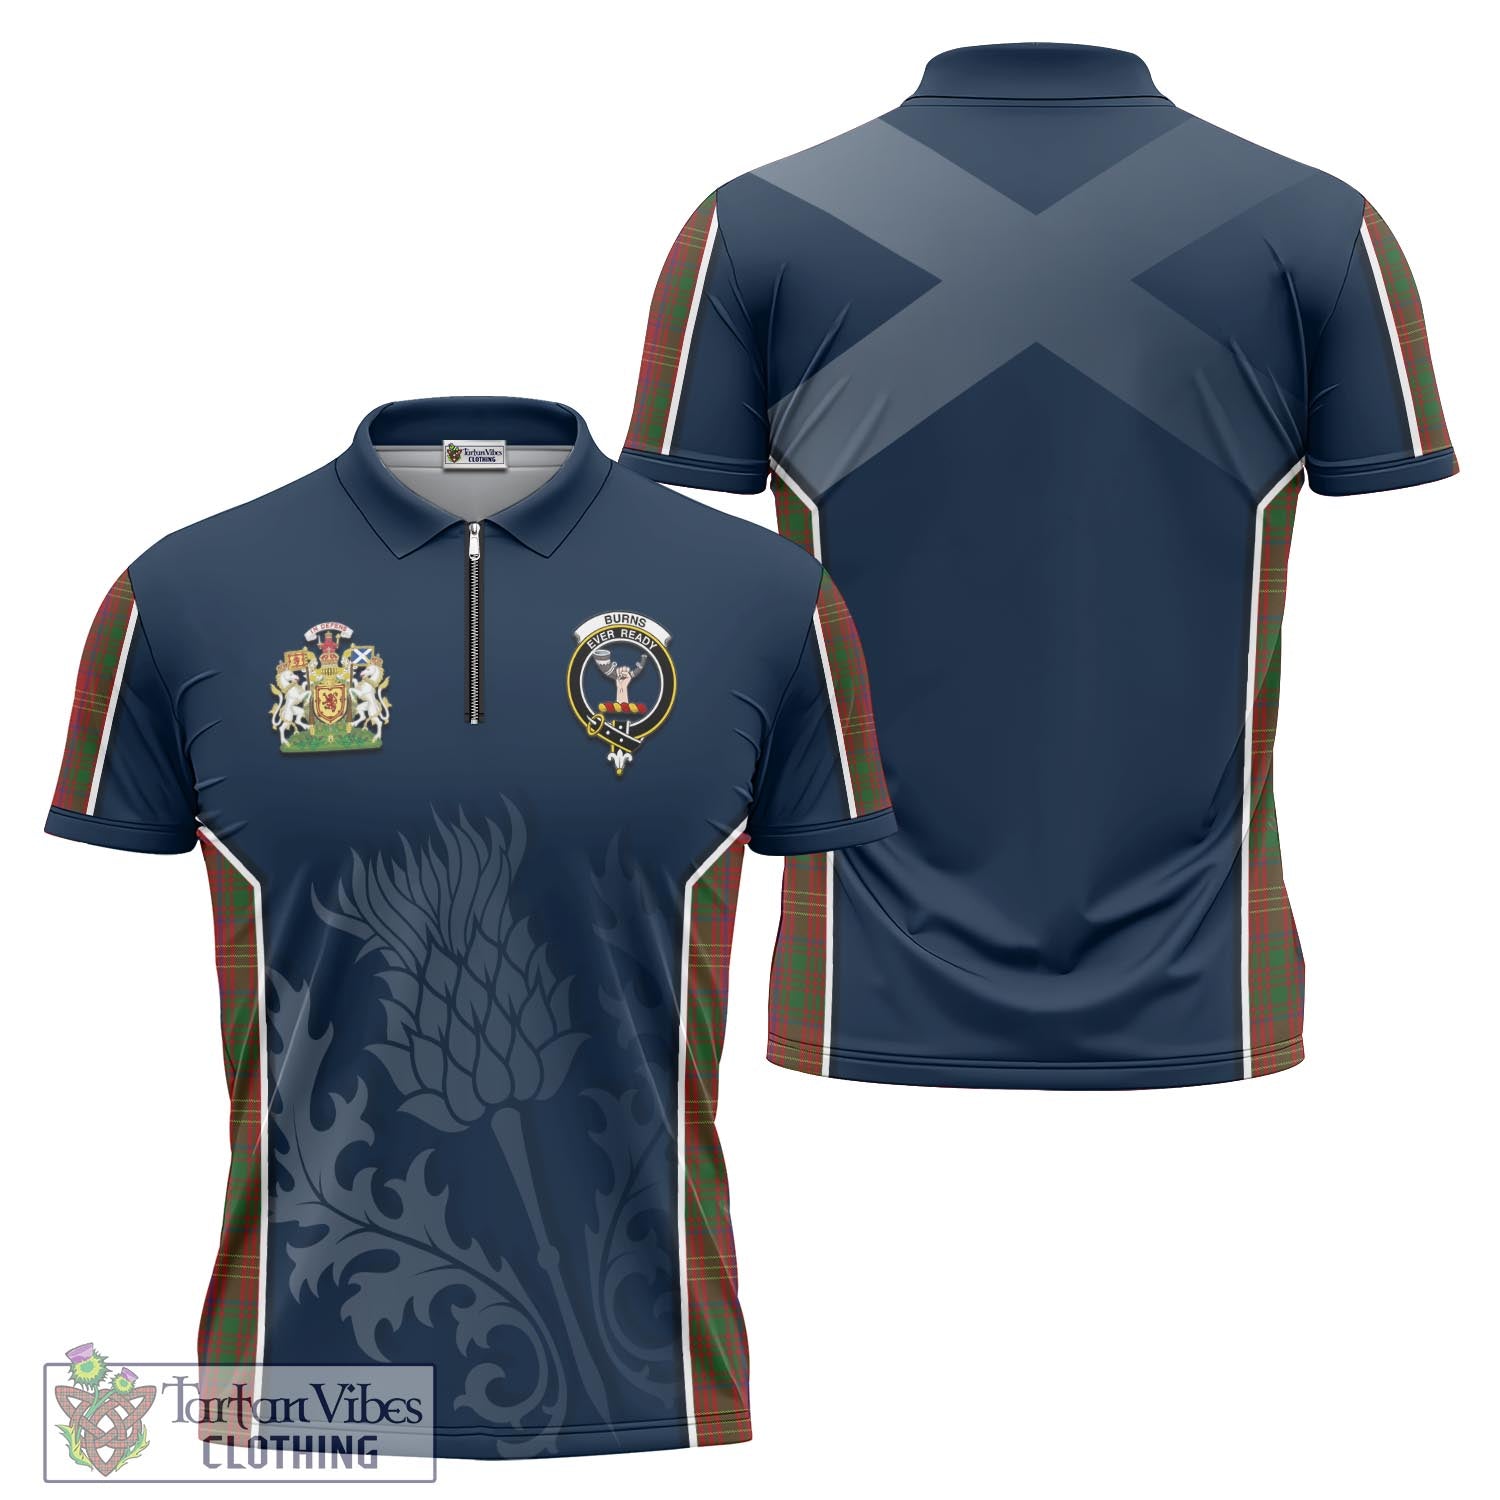 Tartan Vibes Clothing Burns Tartan Zipper Polo Shirt with Family Crest and Scottish Thistle Vibes Sport Style